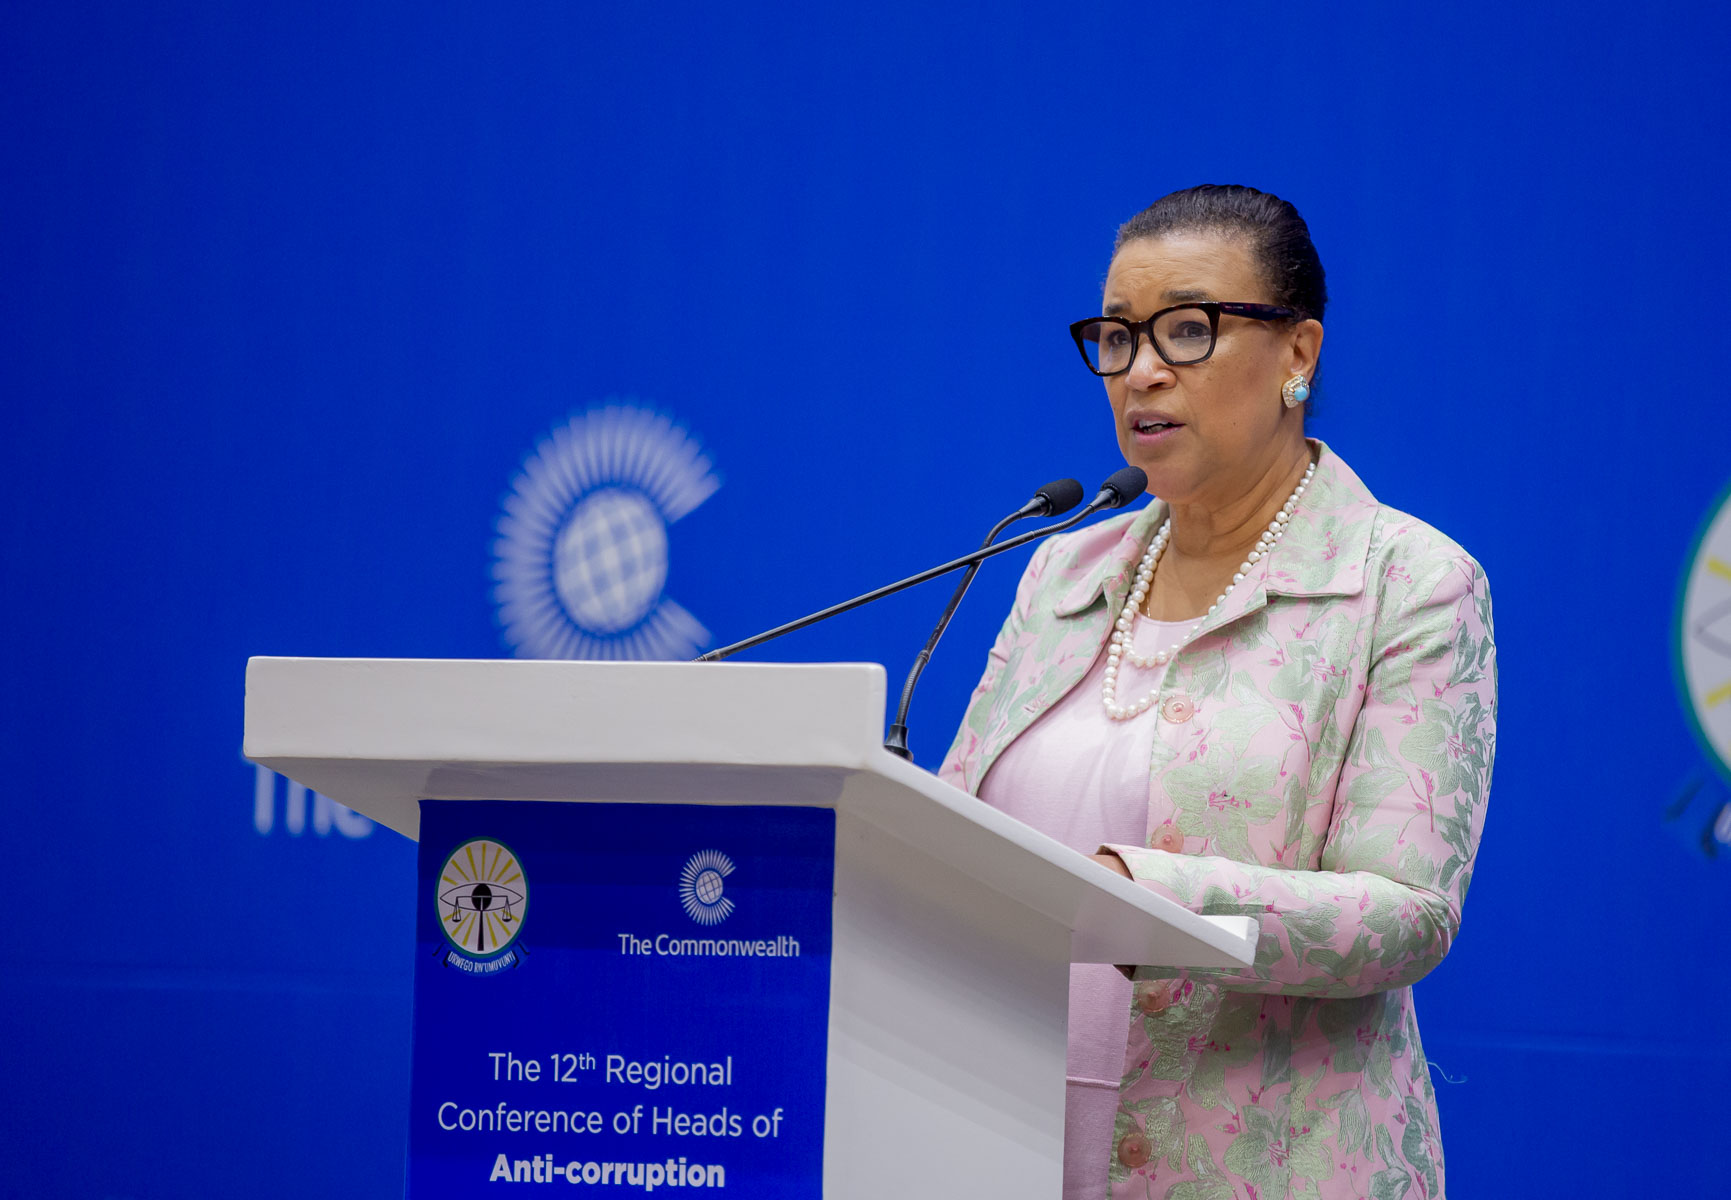 The Commonwealth Secretary-General, Patricia Scotland QC delivers  remarks during the 12th Regional Conference of the Heads of Anti-Corruption Agencies in Commonwealth Africa in Kigali, on May 3, 2022. During her interview , Scotland  talked about the Commonwealth Heads of Government Meeting 2022 (CHOGM2022) that  will be held in Kigali  from June 20 to 25. 